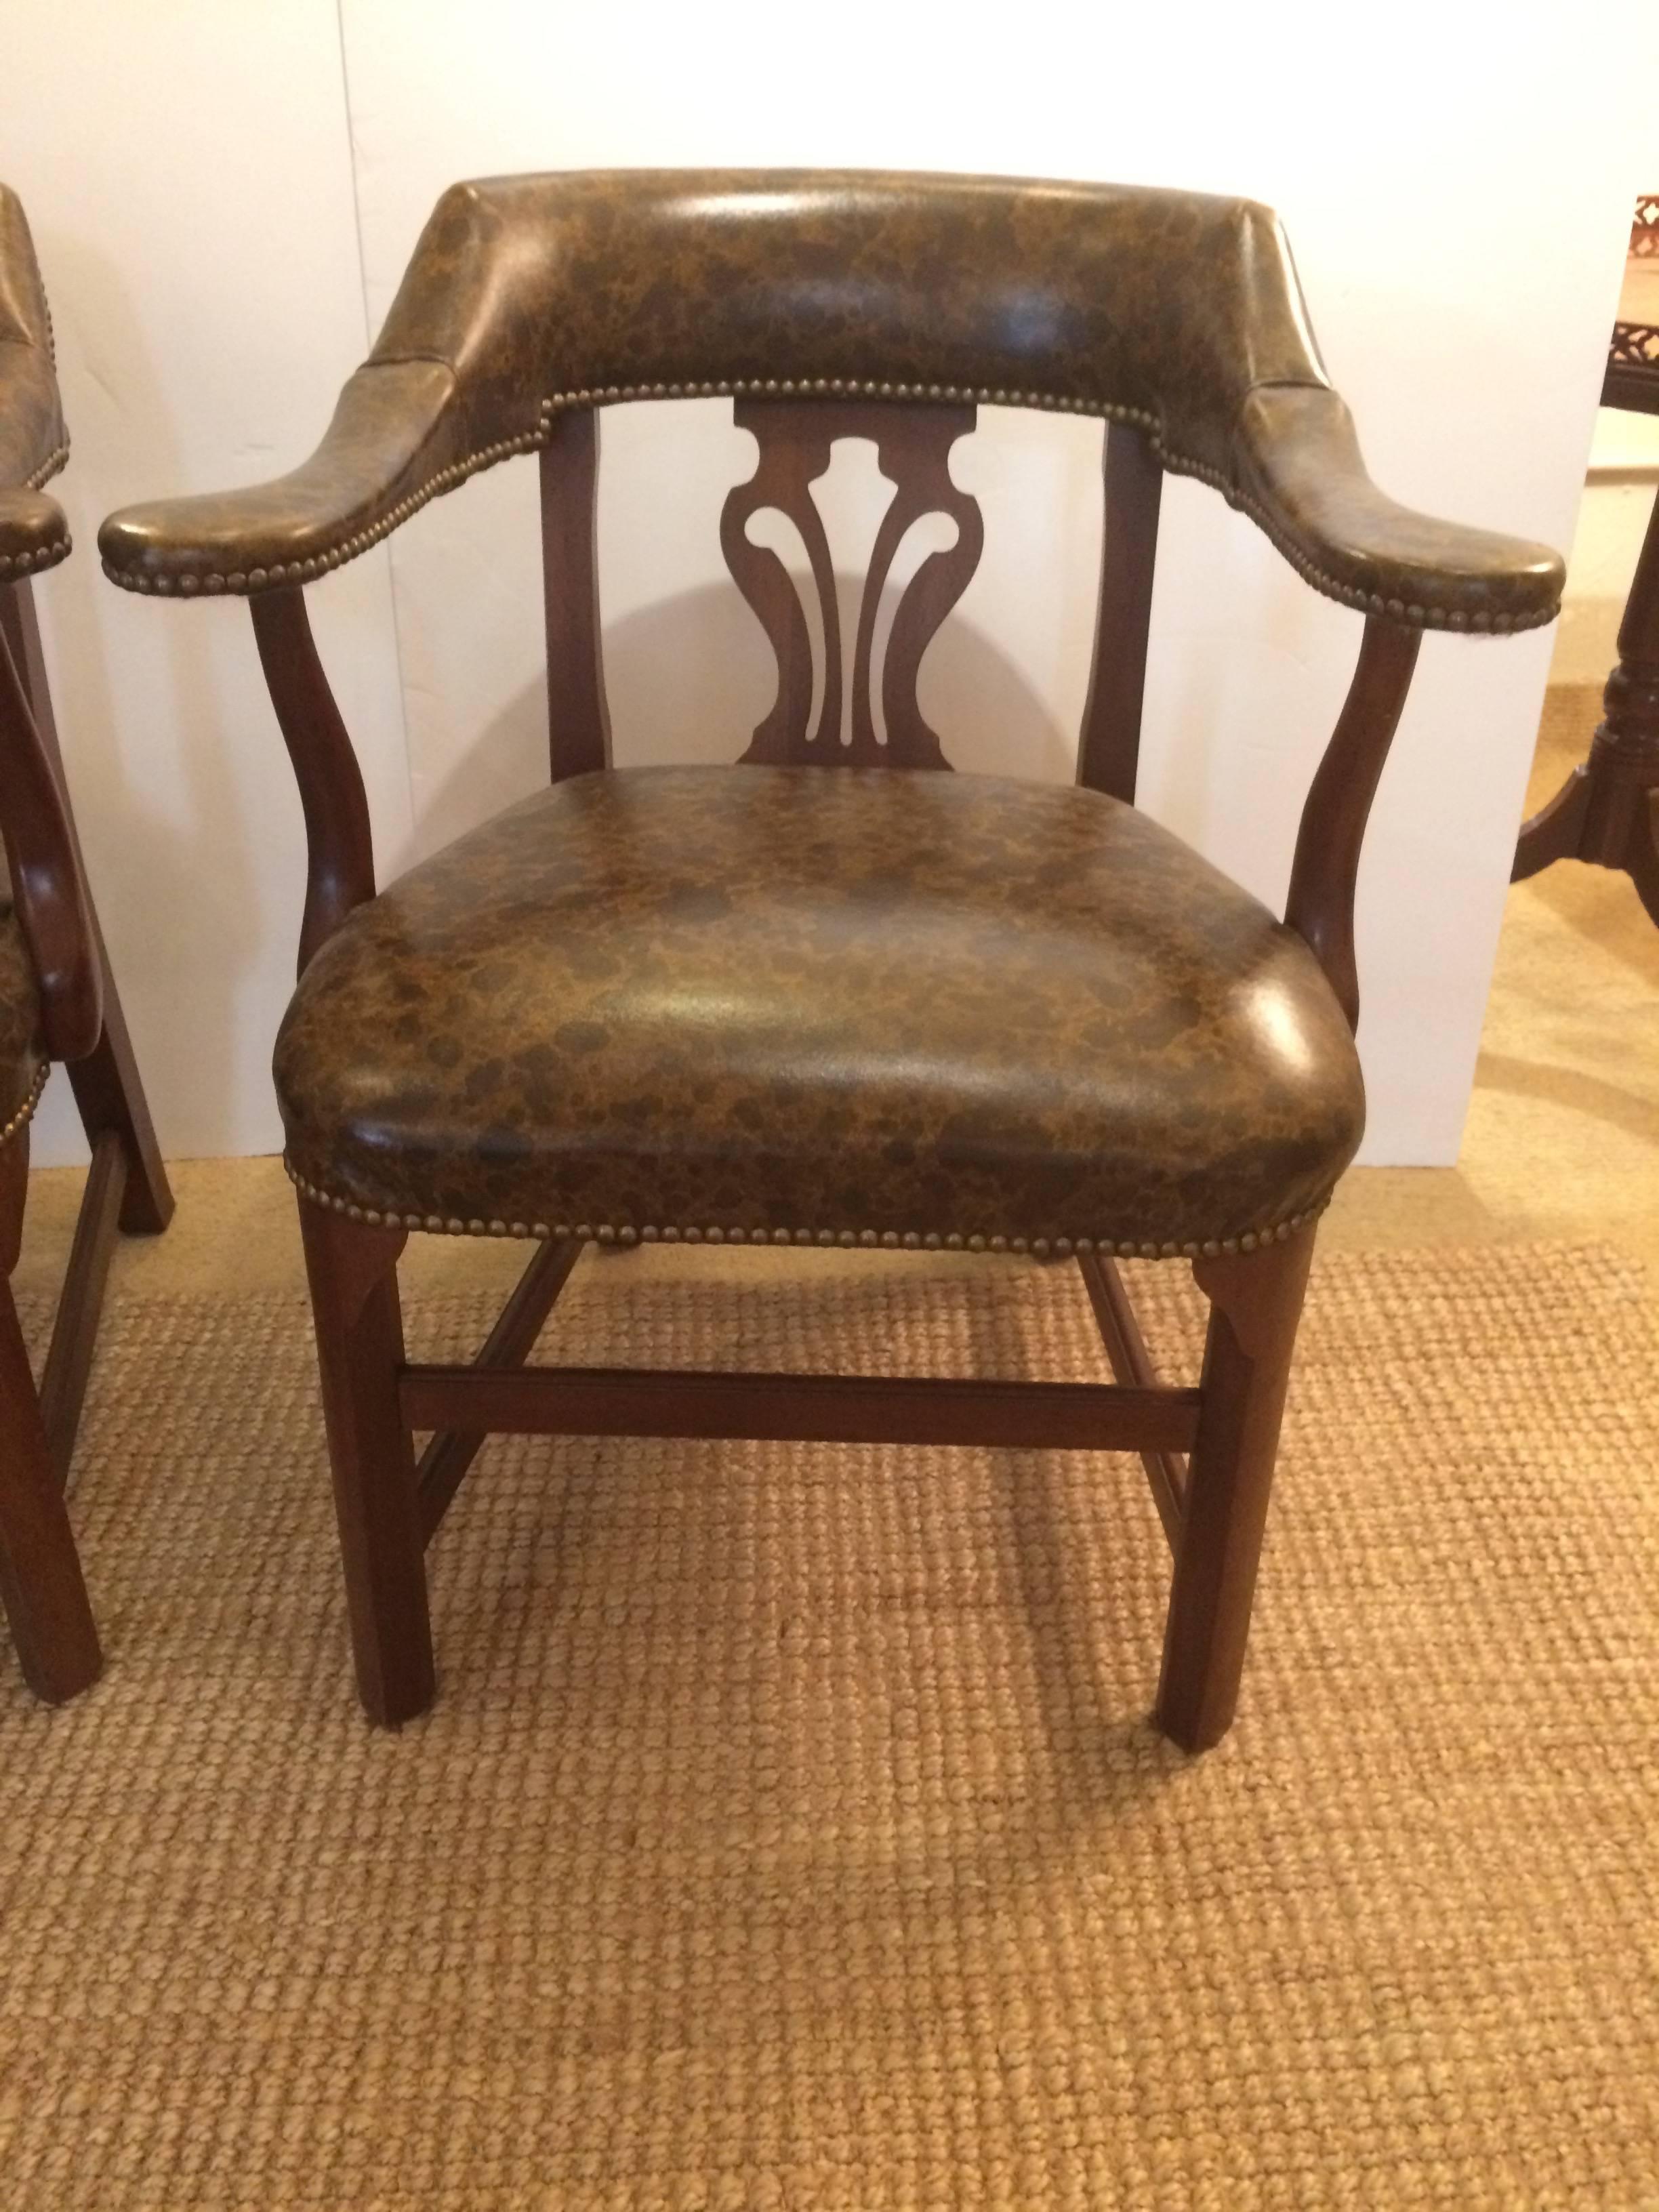 Two masculine club chairs having mahogany curved back and arms with decorative fleur di lis style cut out, upholstered in a rich two tone brown leather that looks like tortoiseshell, all finished in brass nailheads.